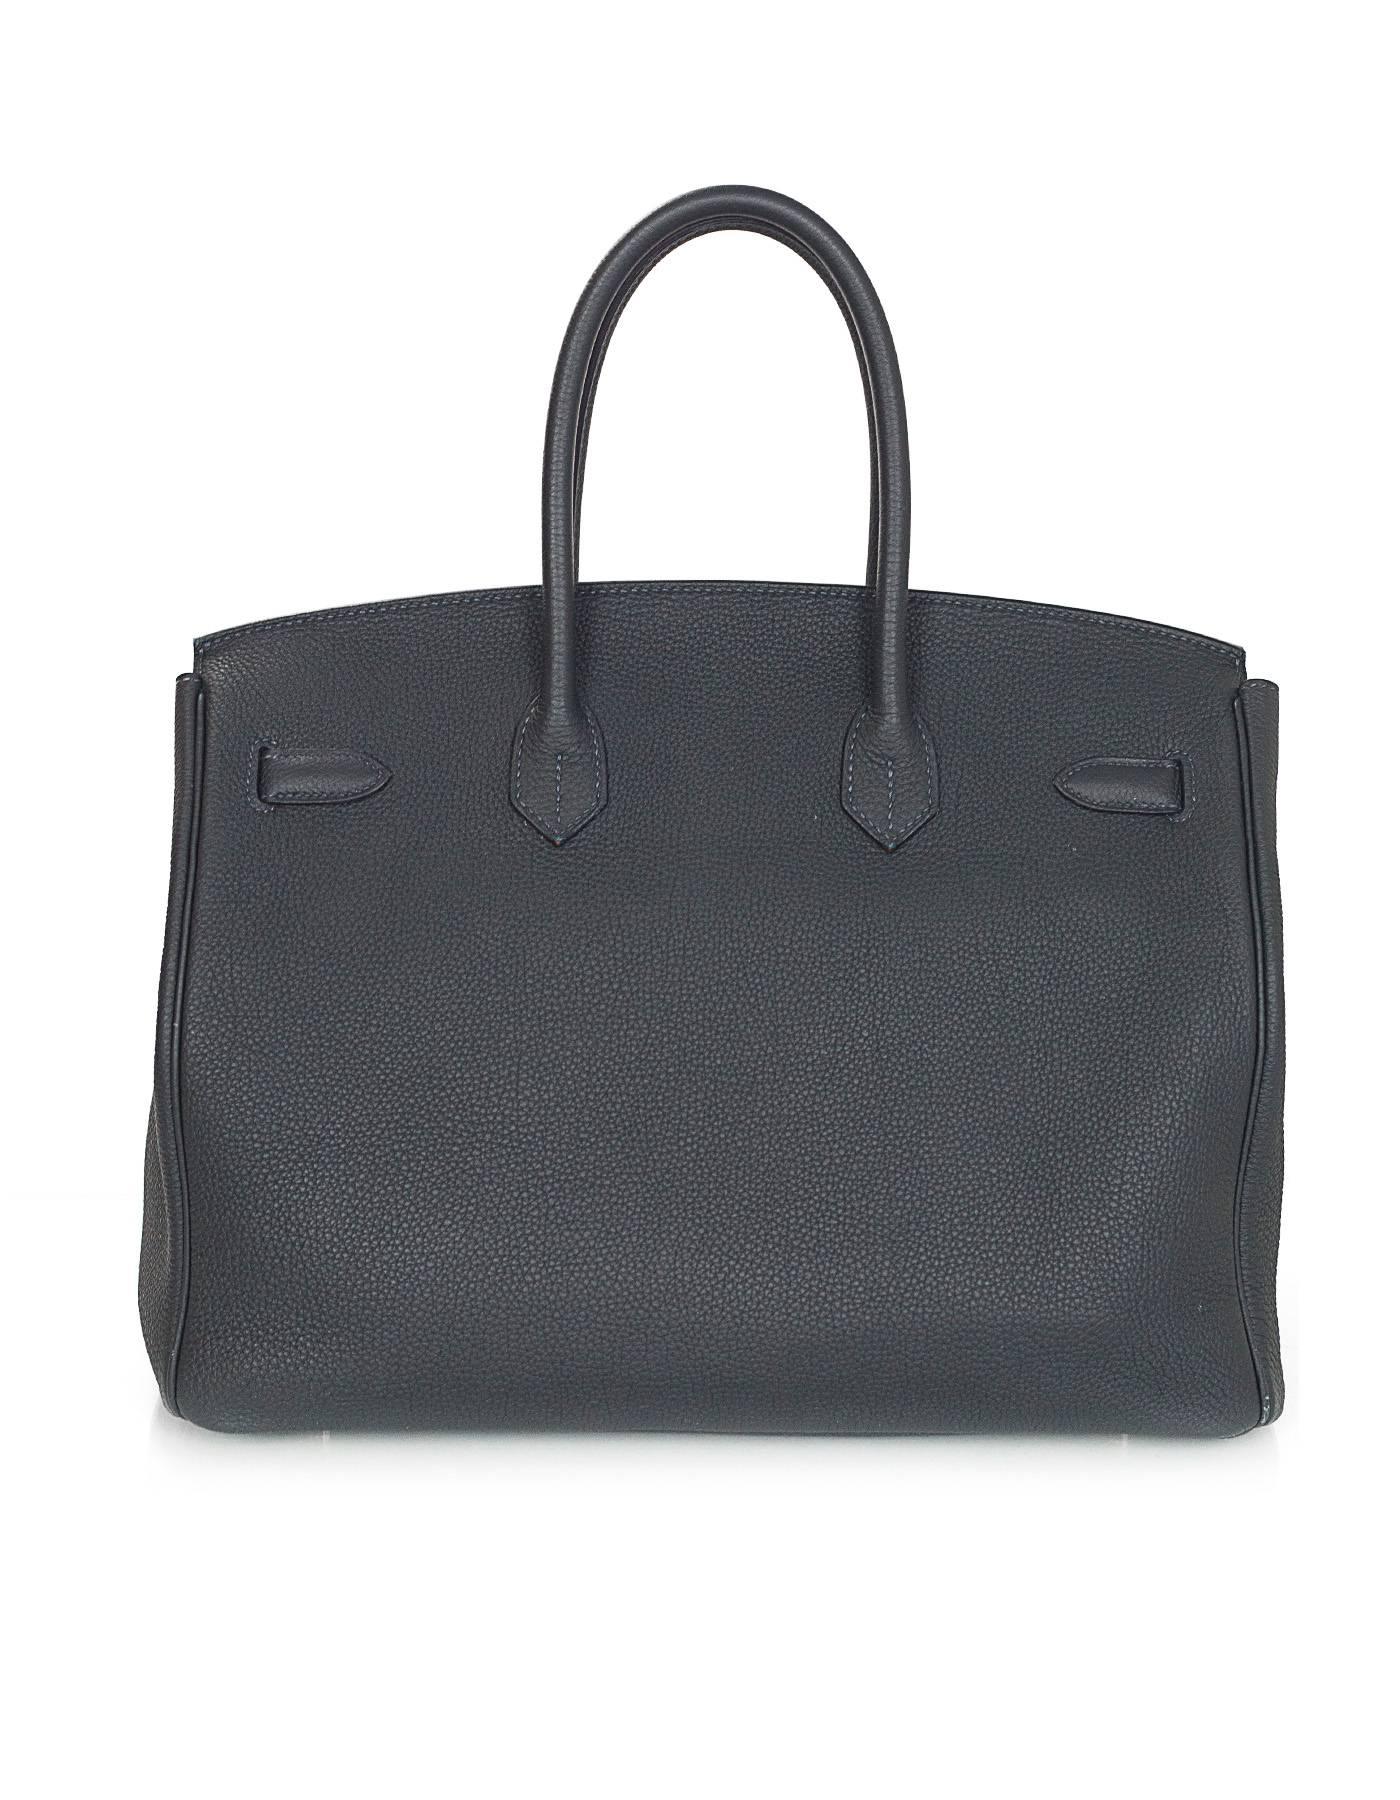 Hermes Bleu Obscur Togo Leather 35cm Birkin Bag
**NOTE: Leather has an odor due to issue in manufacturing process during this specified year**

Made In: France
Year of Production: 2013
Color: Bleu obscur (dark teal)
Hardware: Goldtone
Materials: